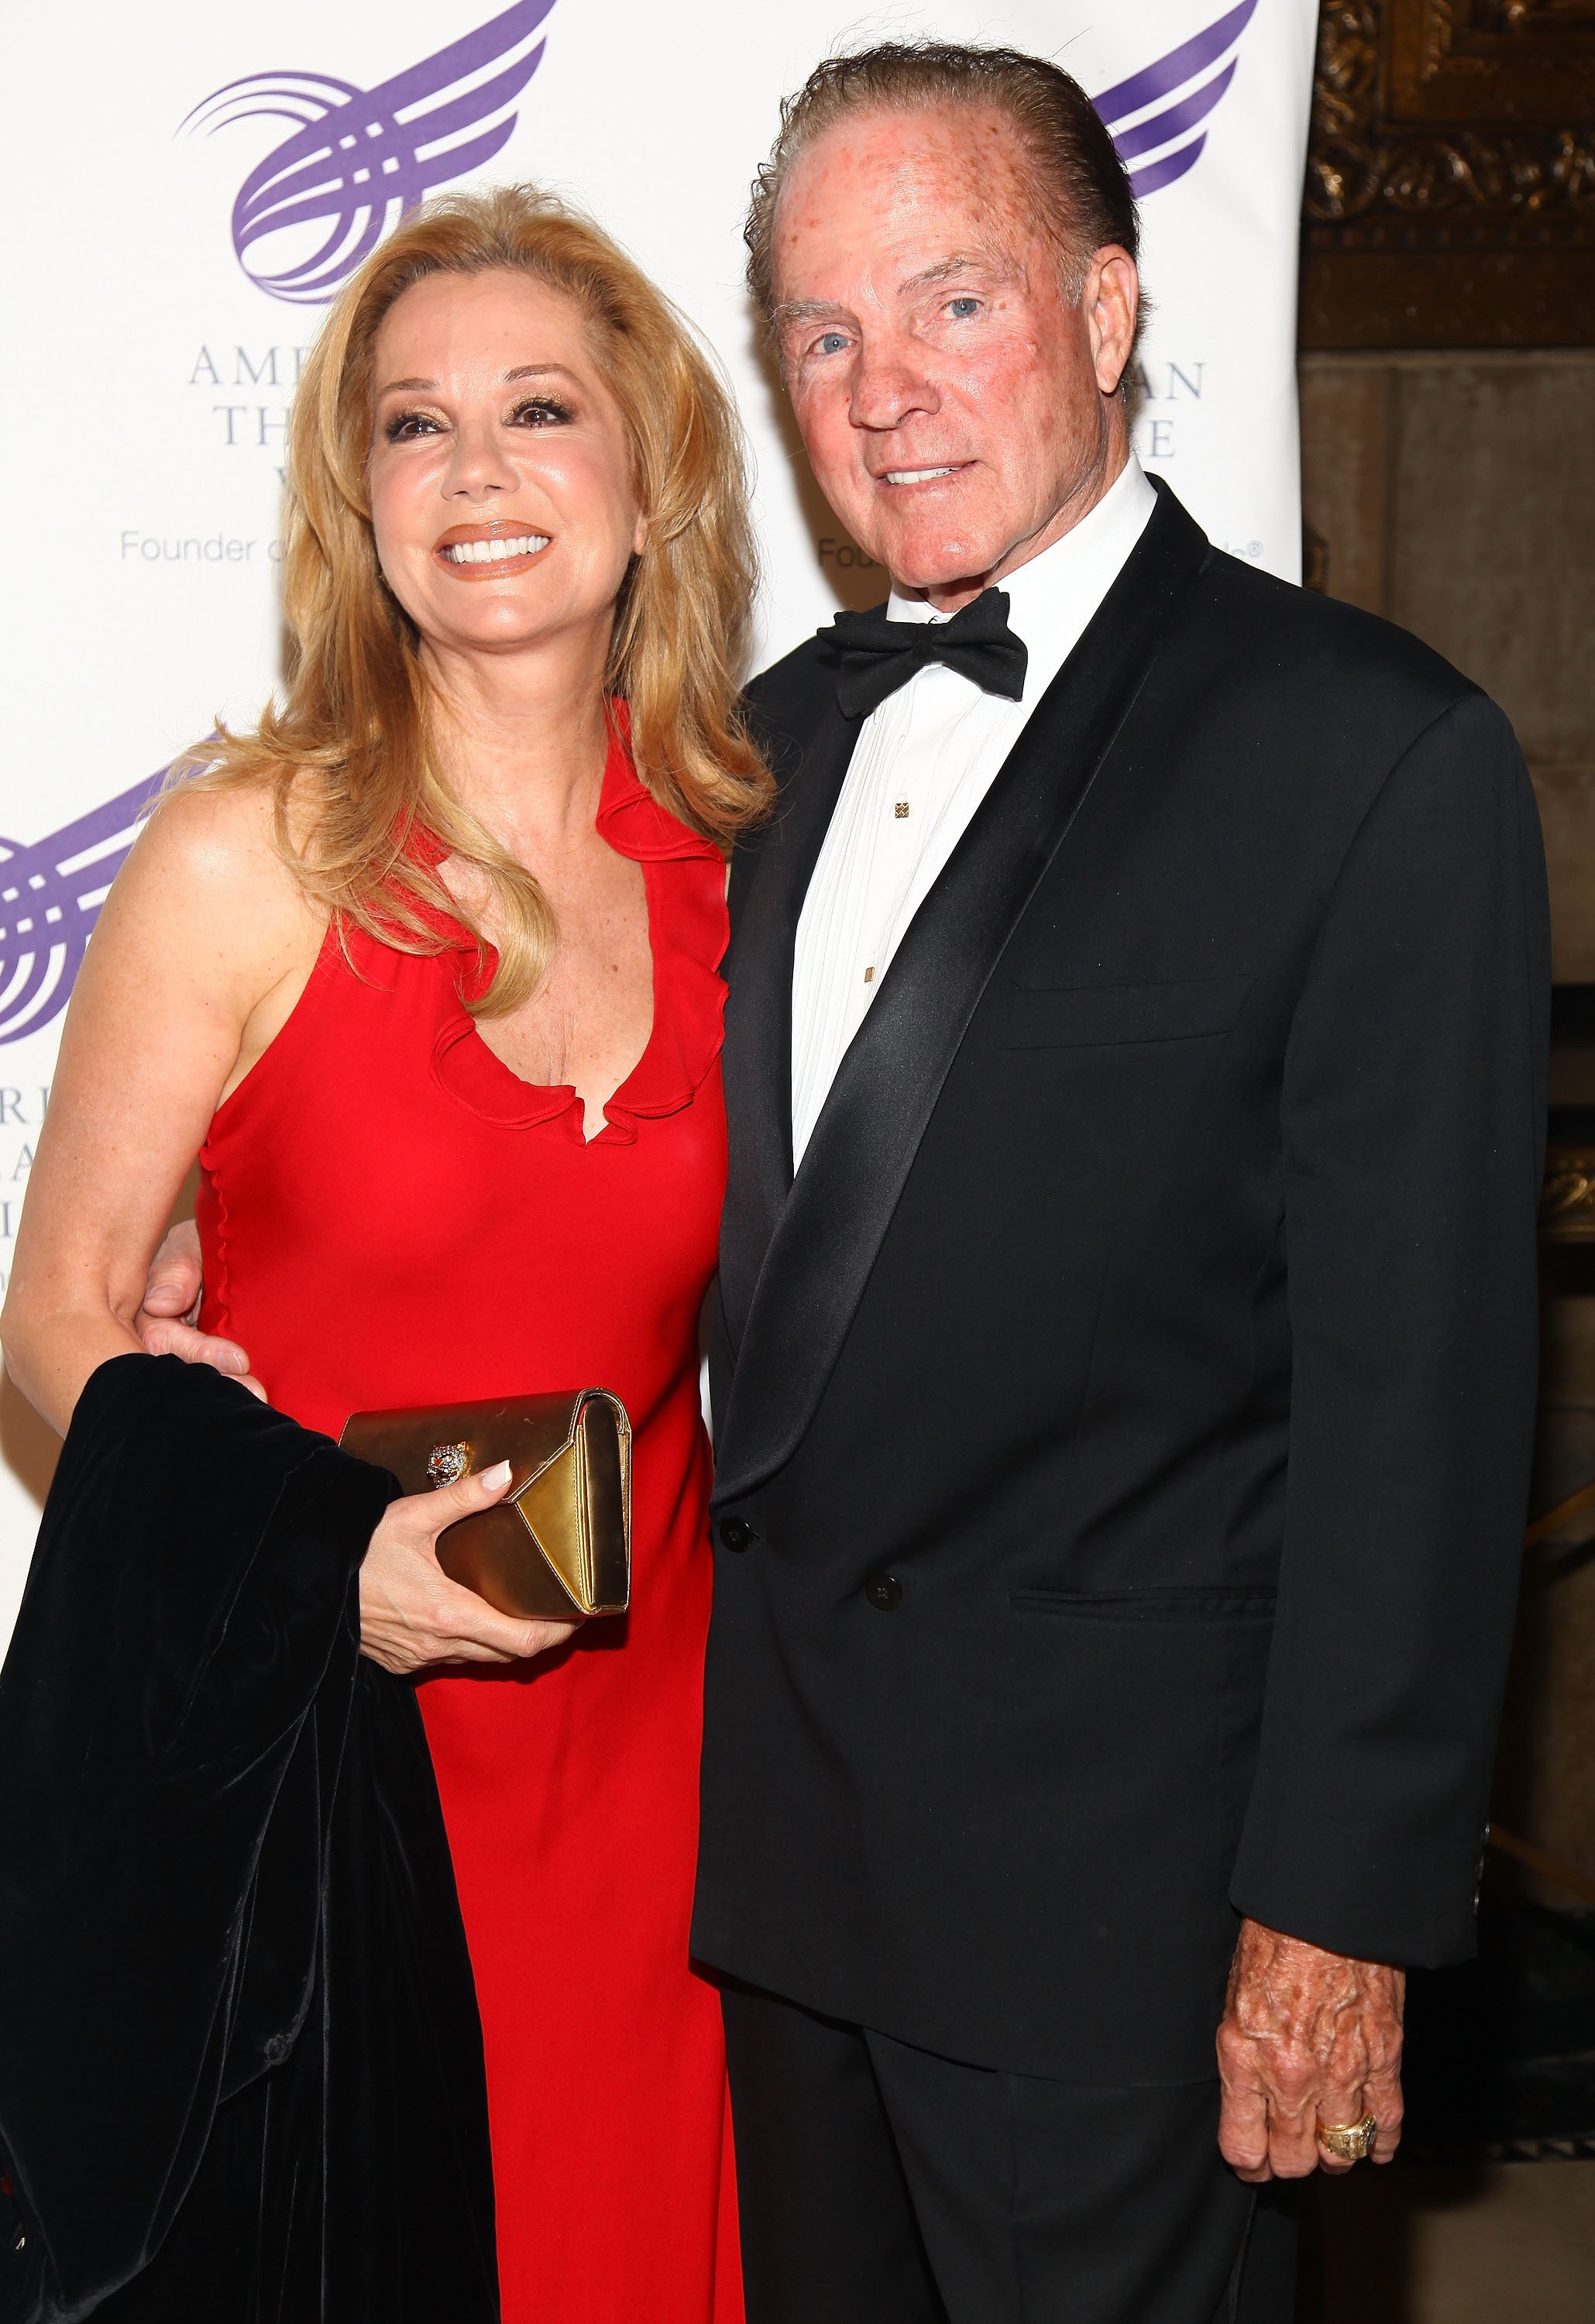 Actress Kathie Lee Gifford and Frank Gifford attend the American Theatre Wing's 2009 Spring Gala at Cipriani 42nd Street on June 1, 2009 in New York City. | Source: Getty Images